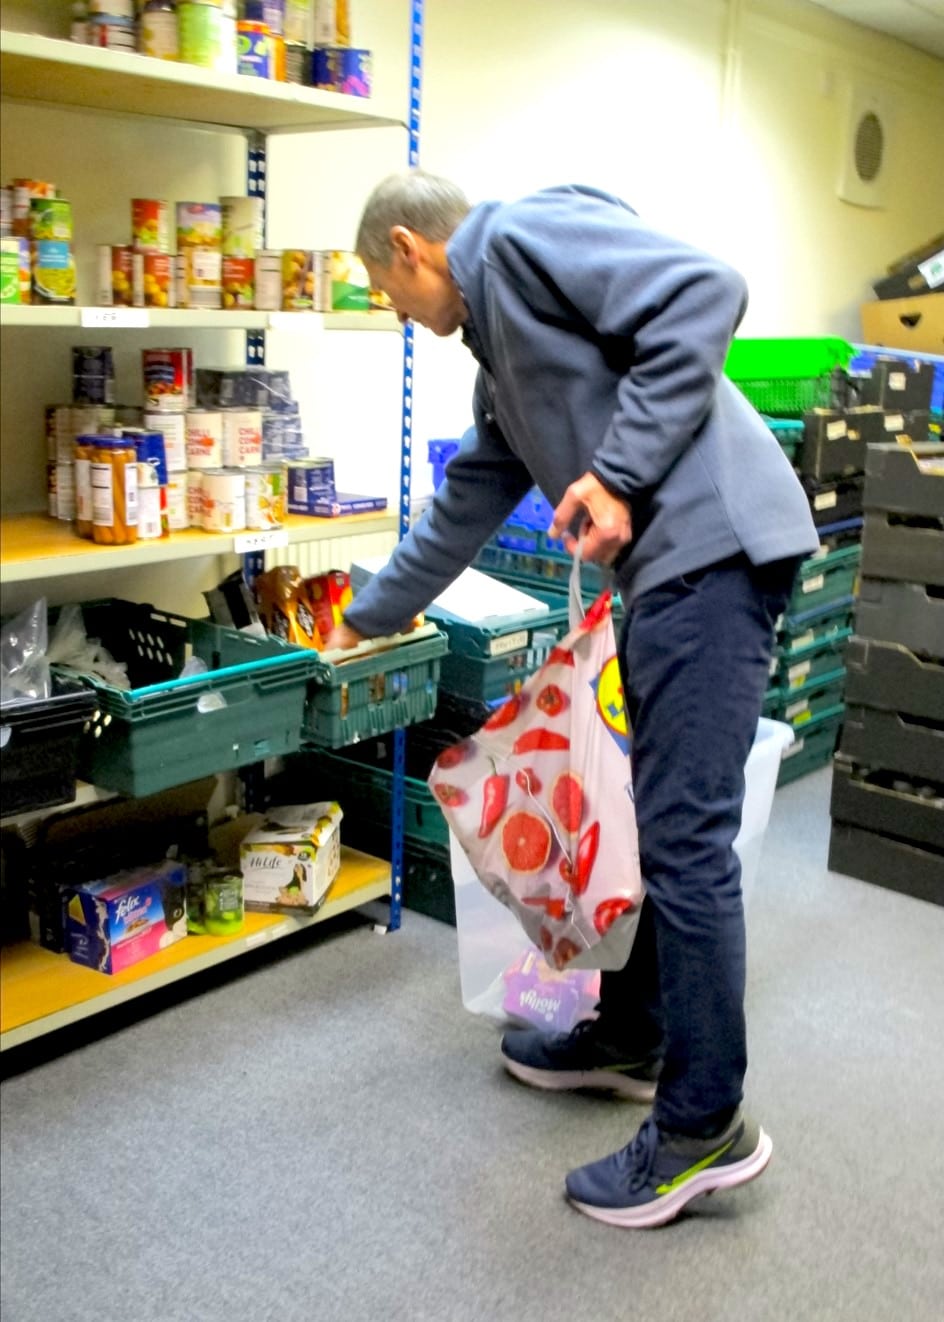 A man leaning to reach into a basket of food on a shelf